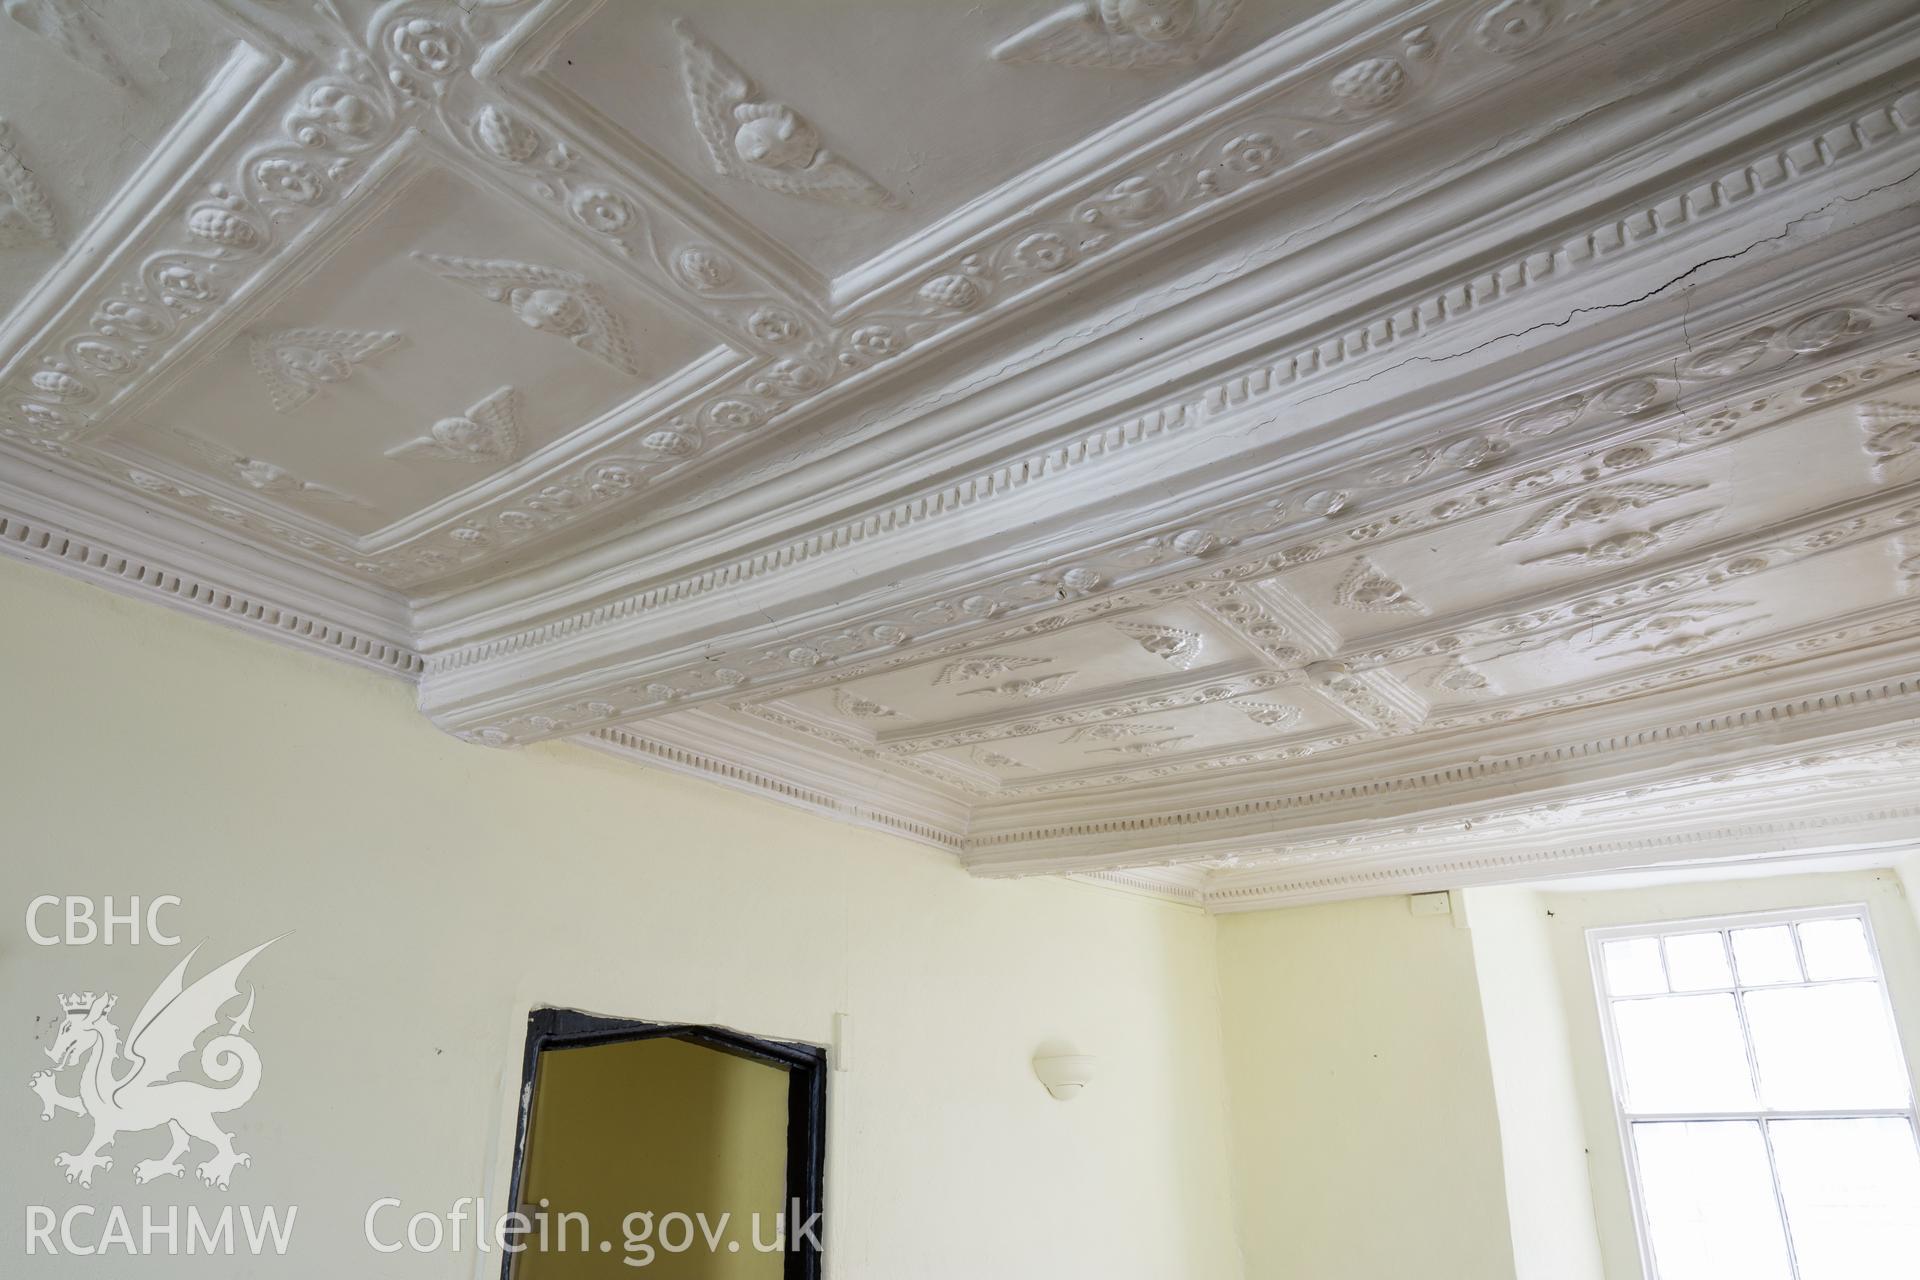 Principal chamber ceiling detail, taken by Martin Crampin for RCAHMW 21st March 2017.